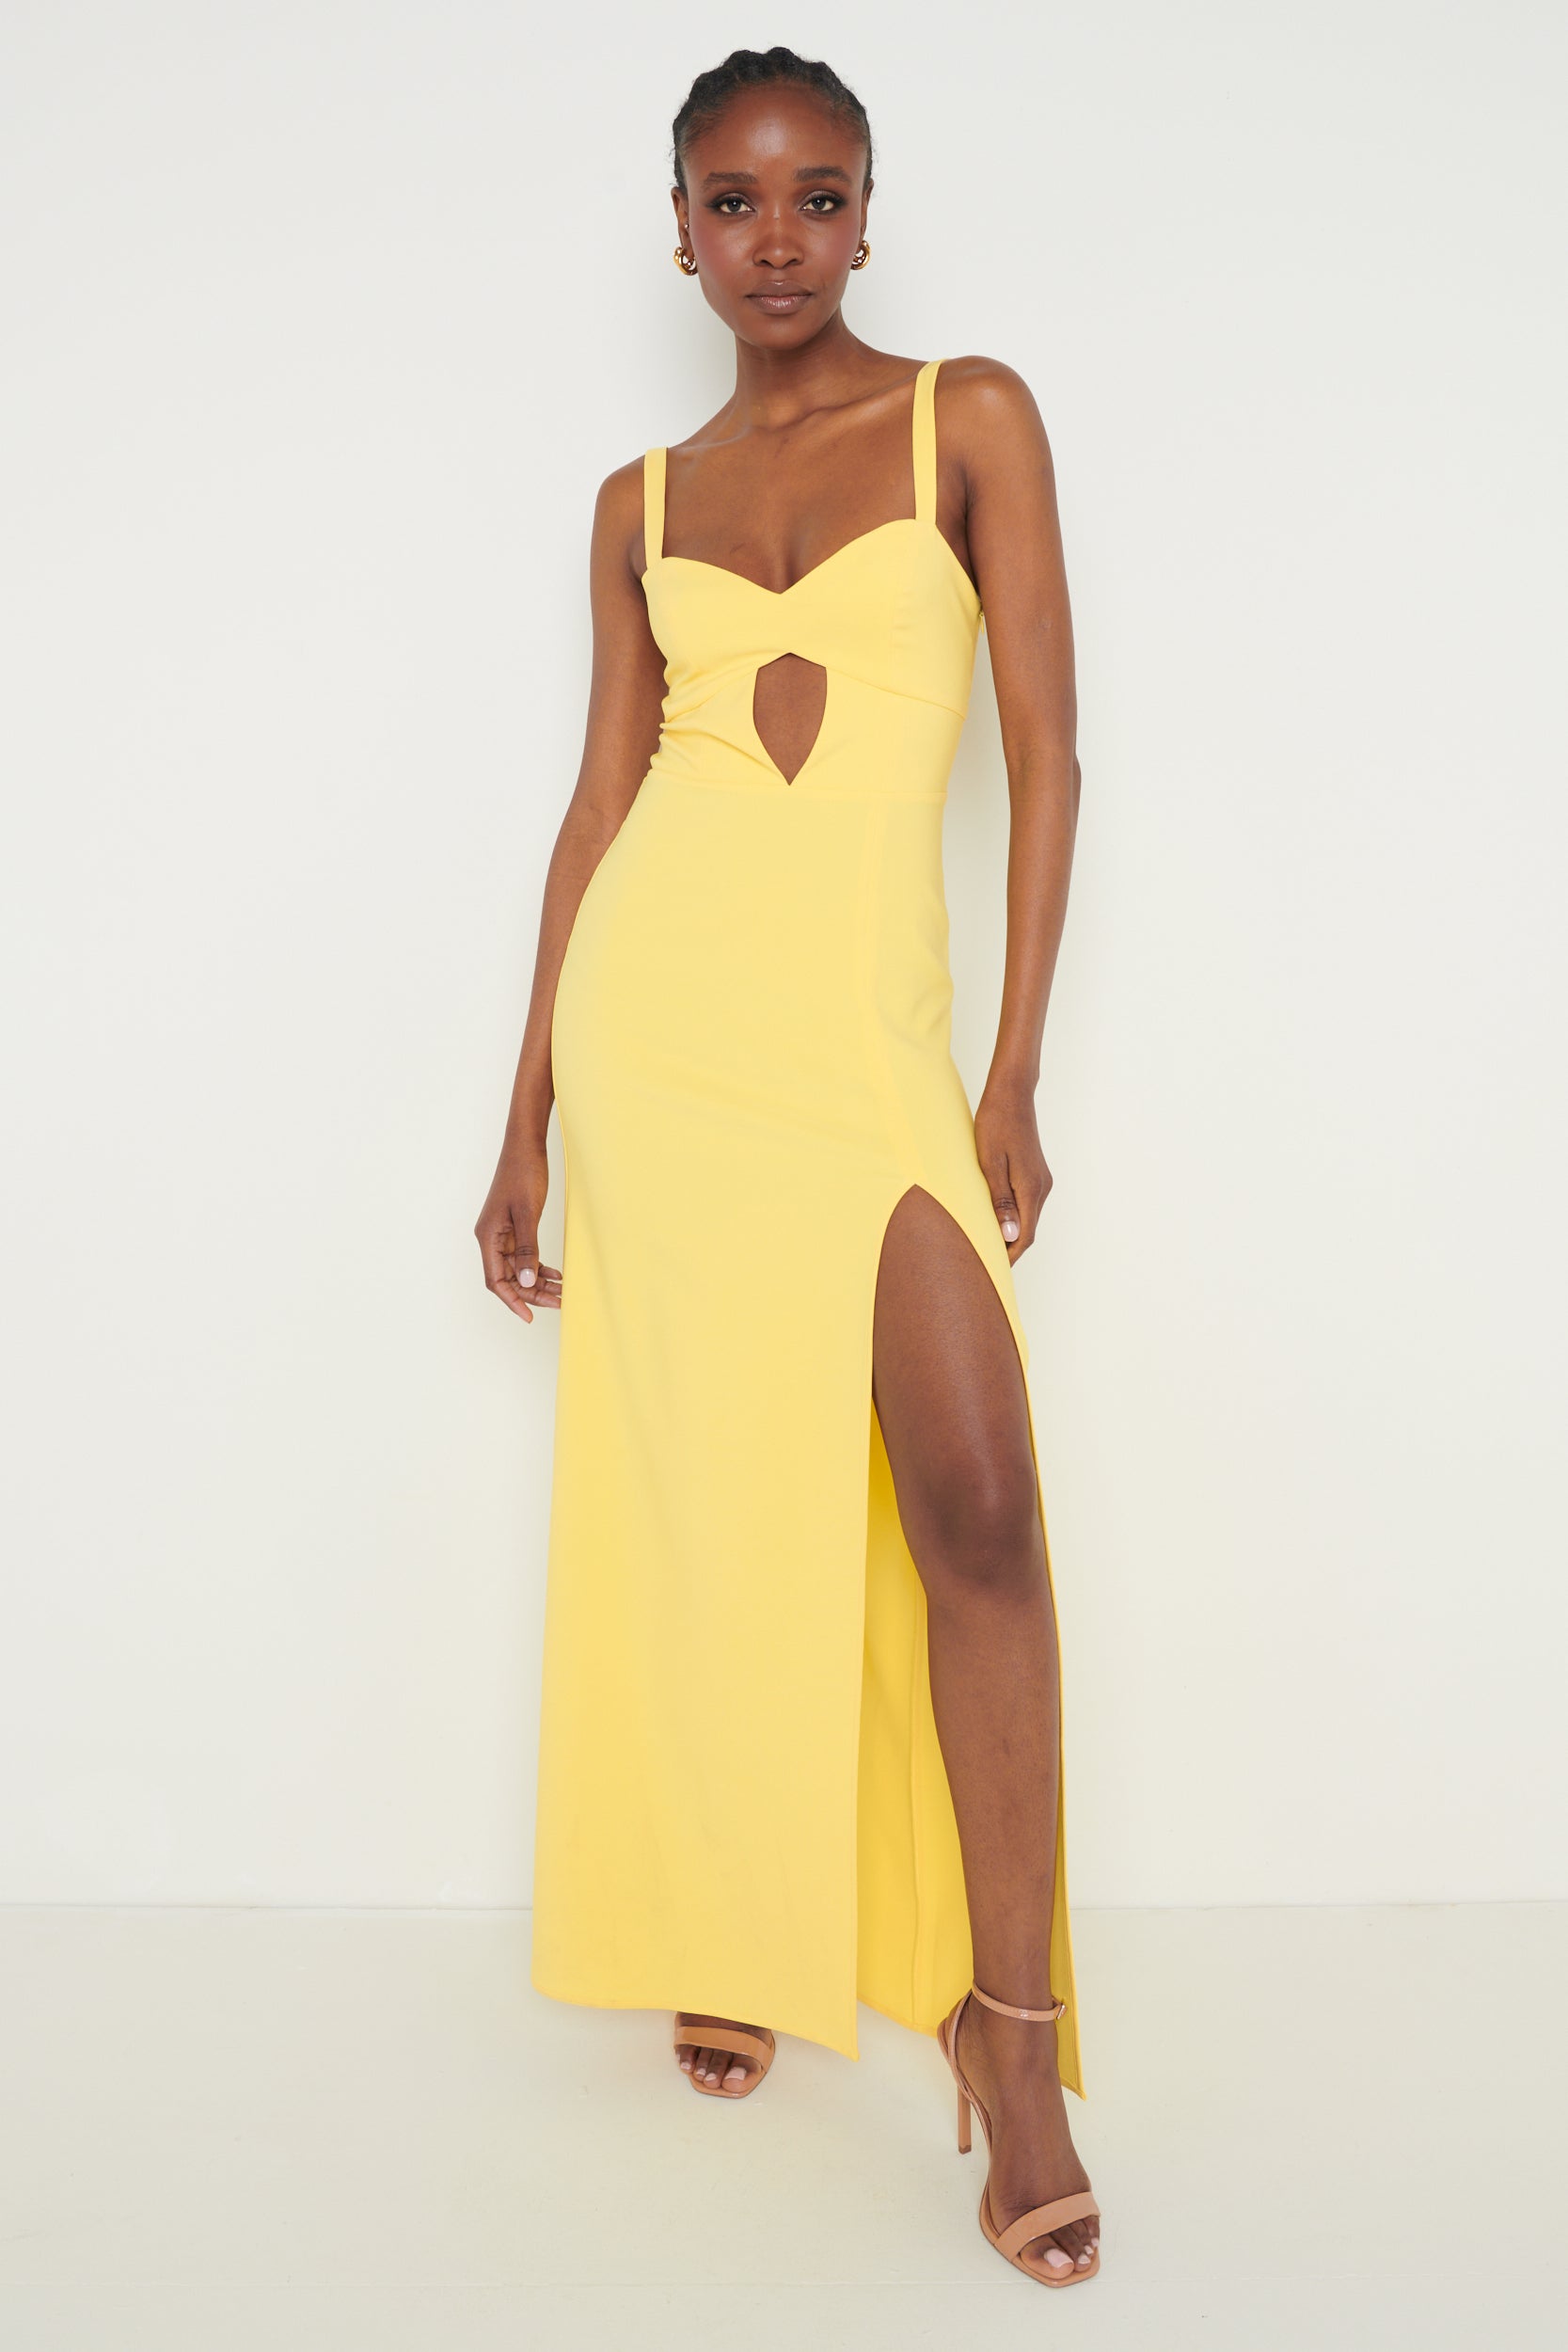 Discover 224+ cut out maxi dress